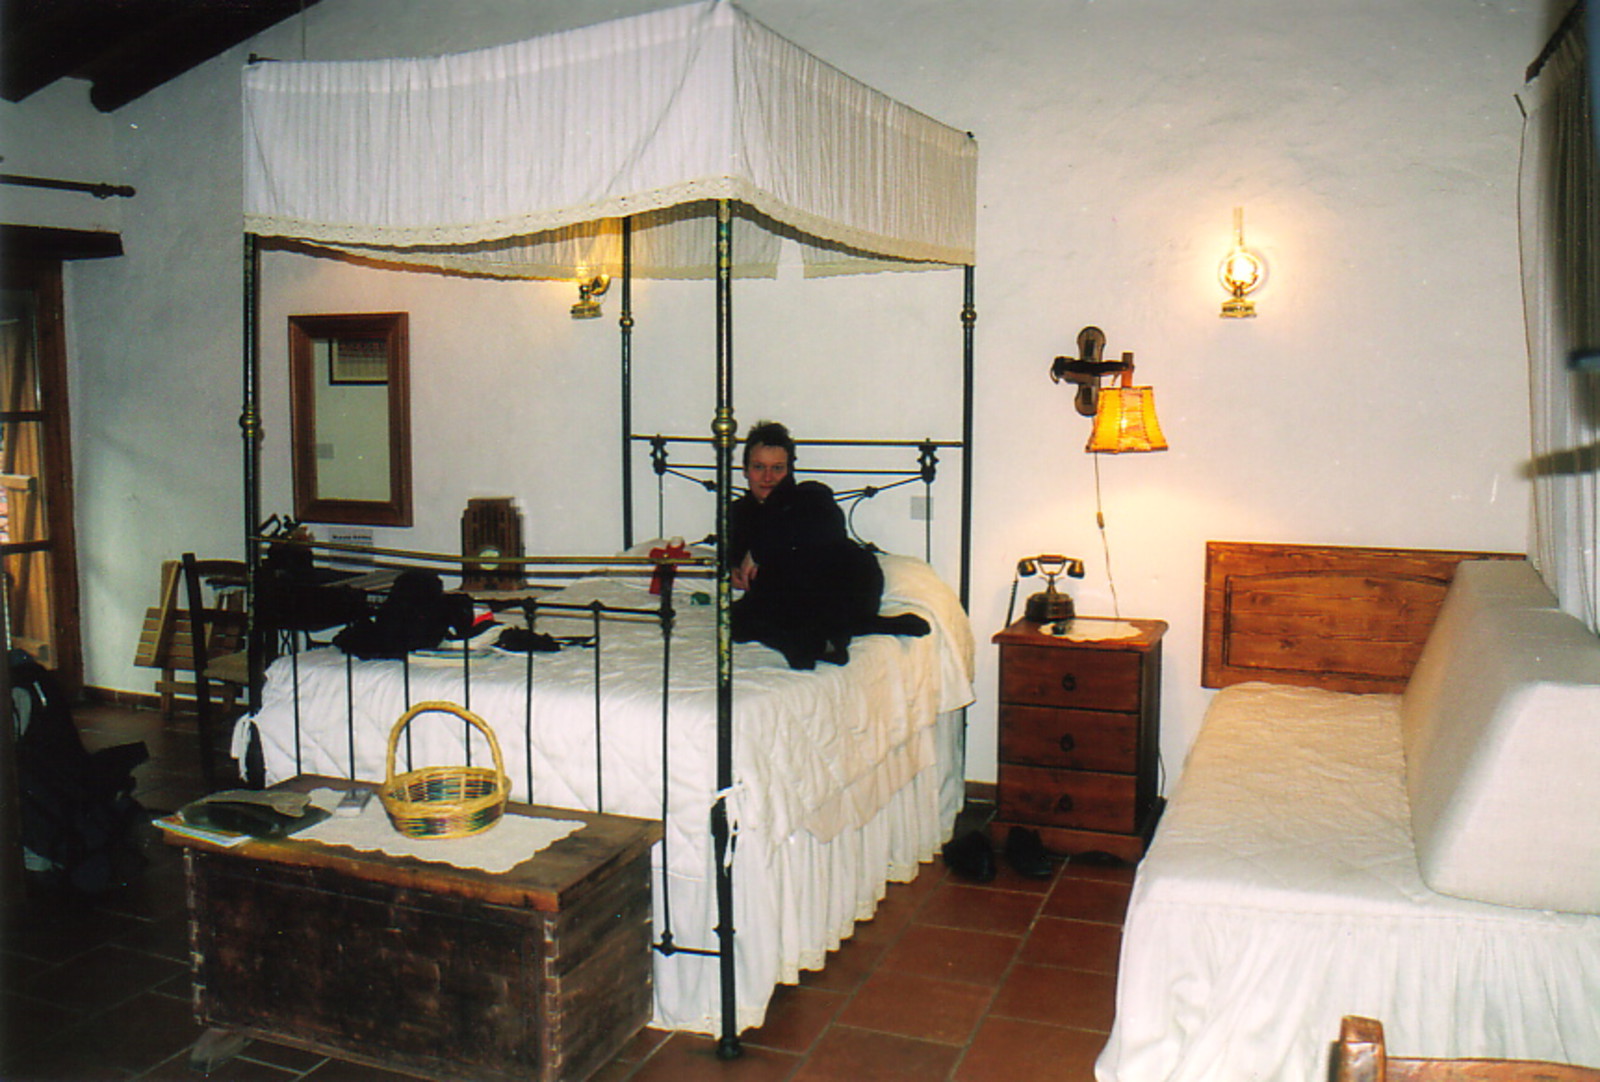 Peta on a four-poster bed in the Linos Inn